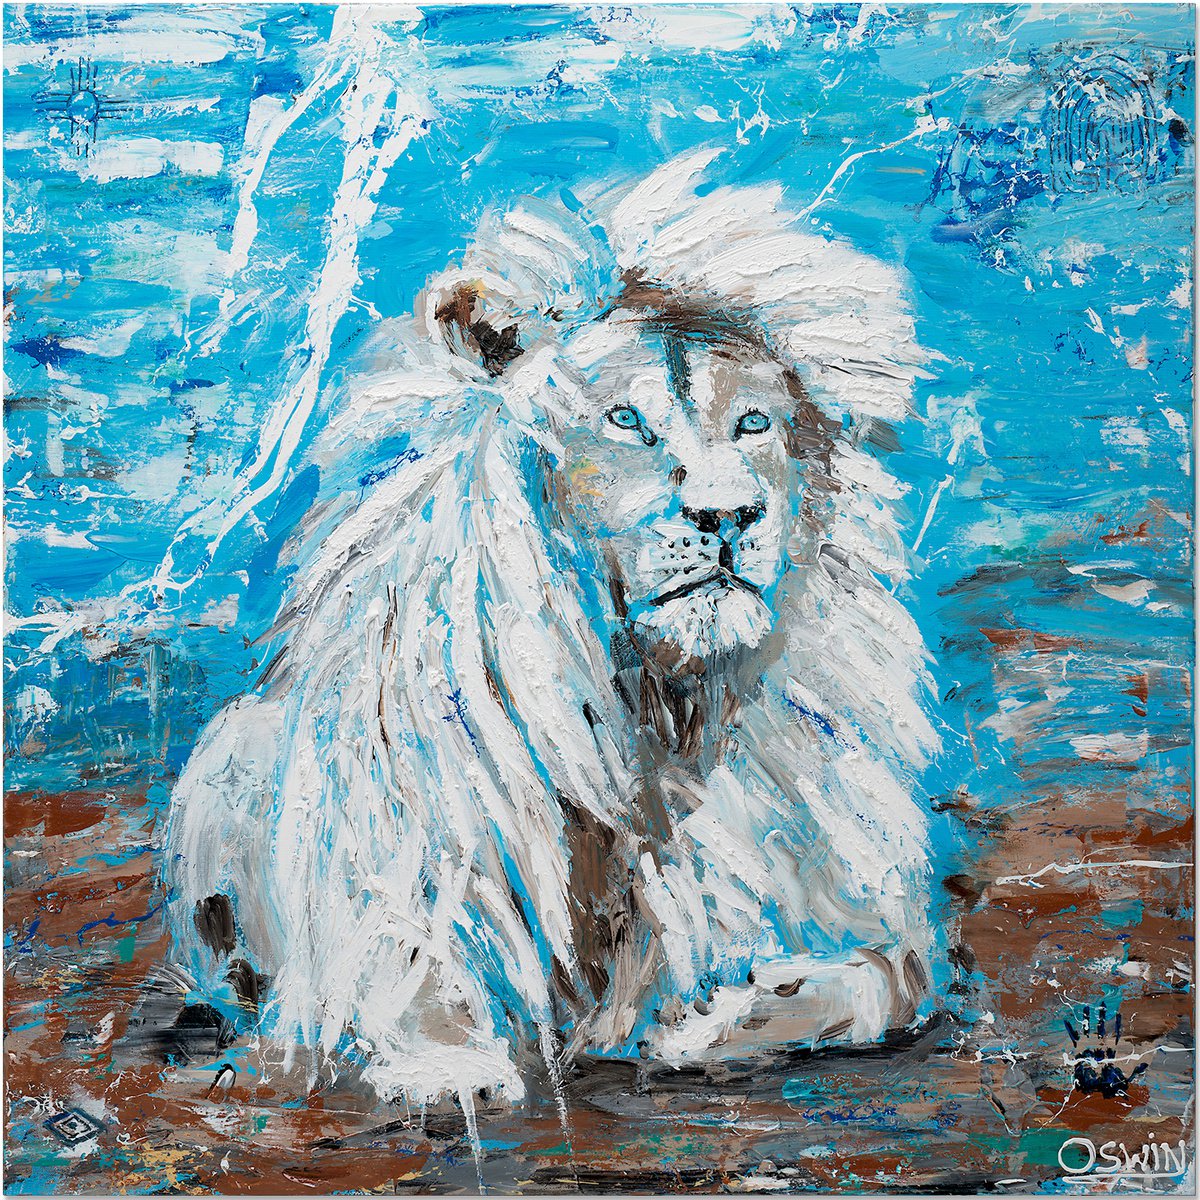 WHITE LION - King of Kings painting- 100 x 100 cm| 39.4 x 39.4 Series Hidden Treasures b... by Oswin Gesselli